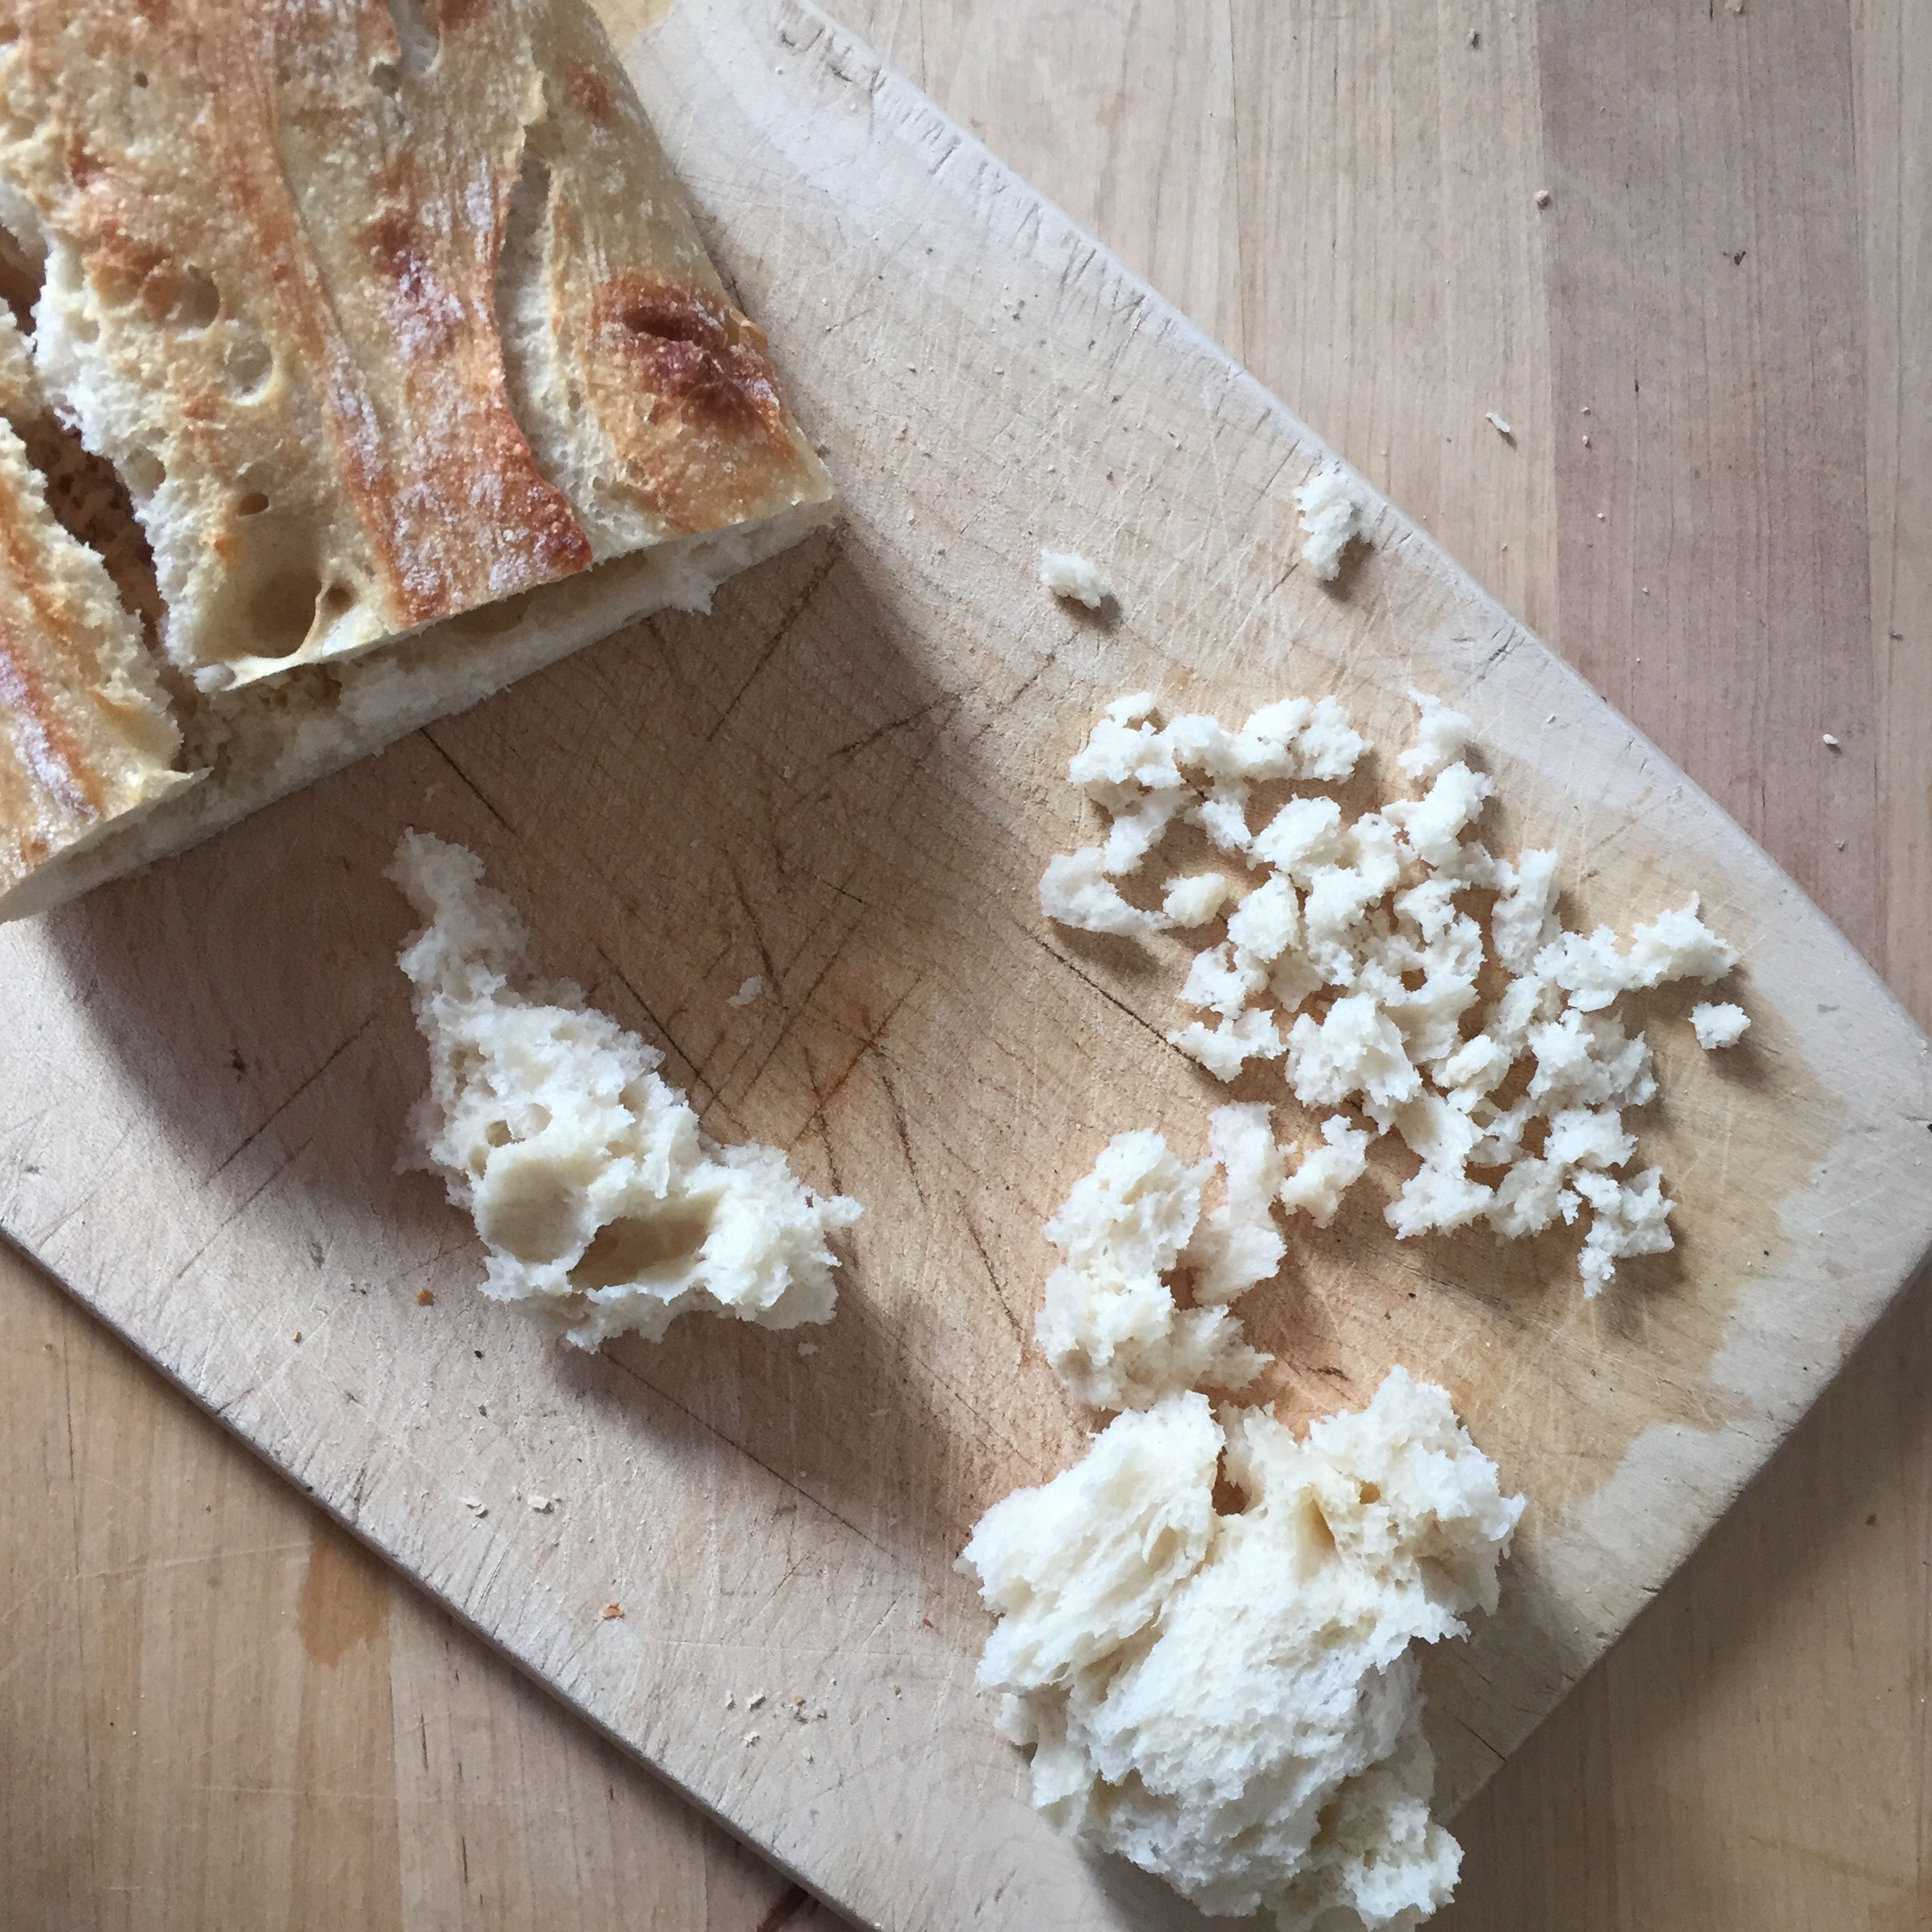 Remove the soft inside of the ciabatta bread and crumble it. Toast with 2 tbsp olive oil, a crushed garlic clove, and salt until golden brown. Let cool down.